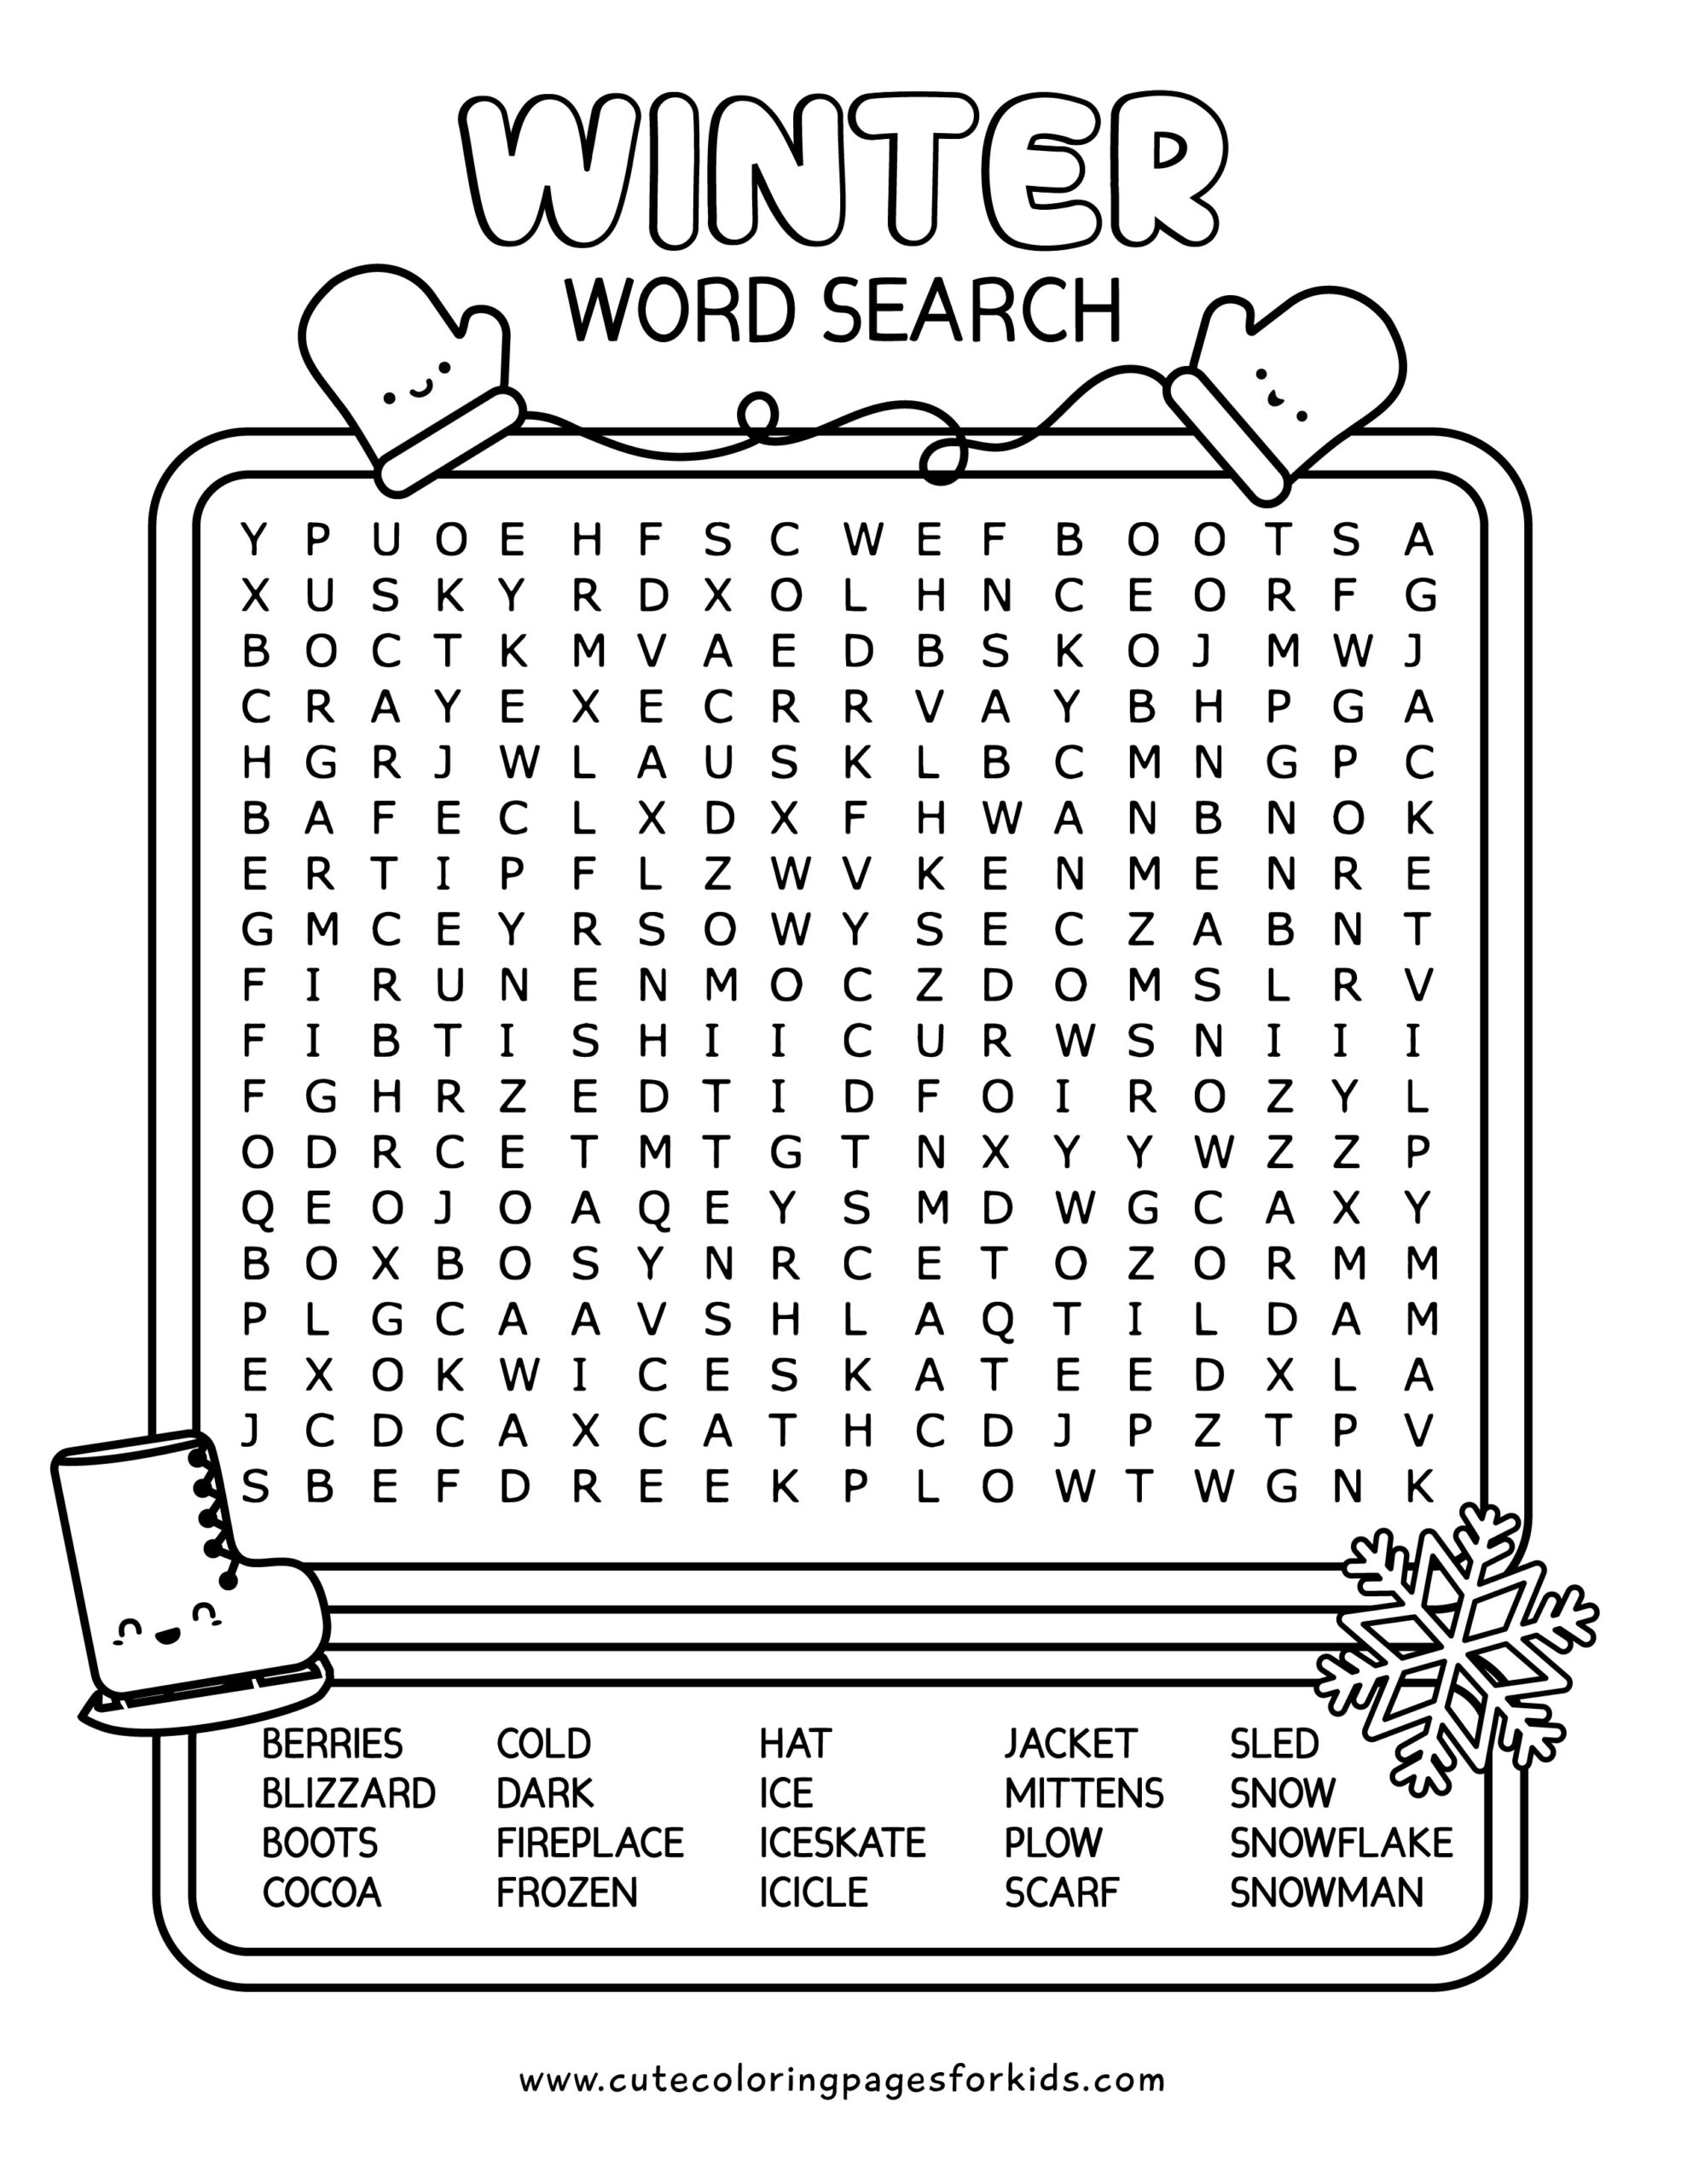 Winter Word Search: Free Printable Activity for Kids - Cute Coloring ...